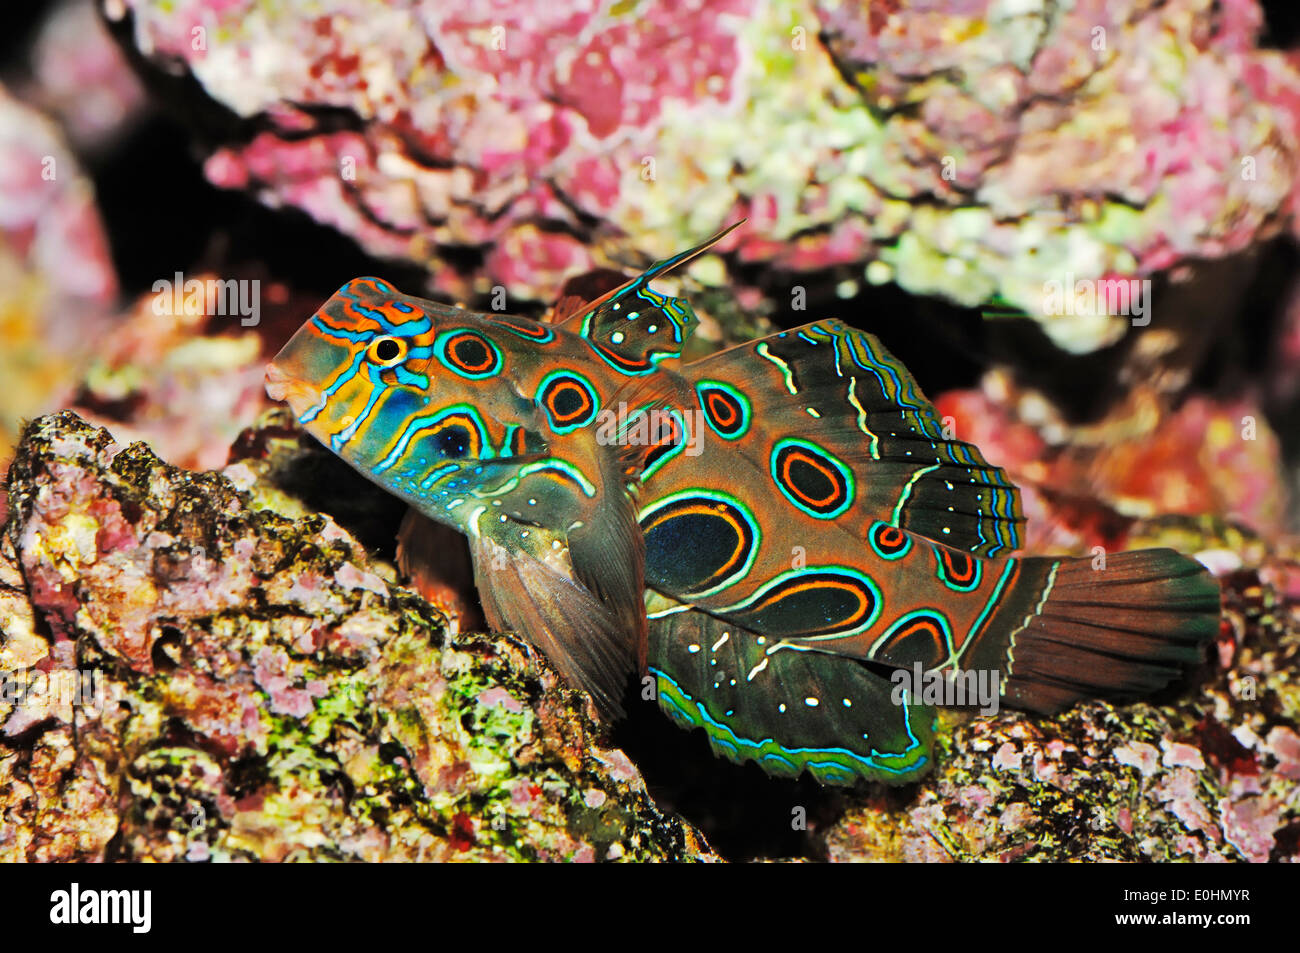 Spotted Mandarin Fish, Target Mandarin, Spotted Green Mandarin Fish or Picturesque Dragonet (Synchiropus picturatus) Stock Photo